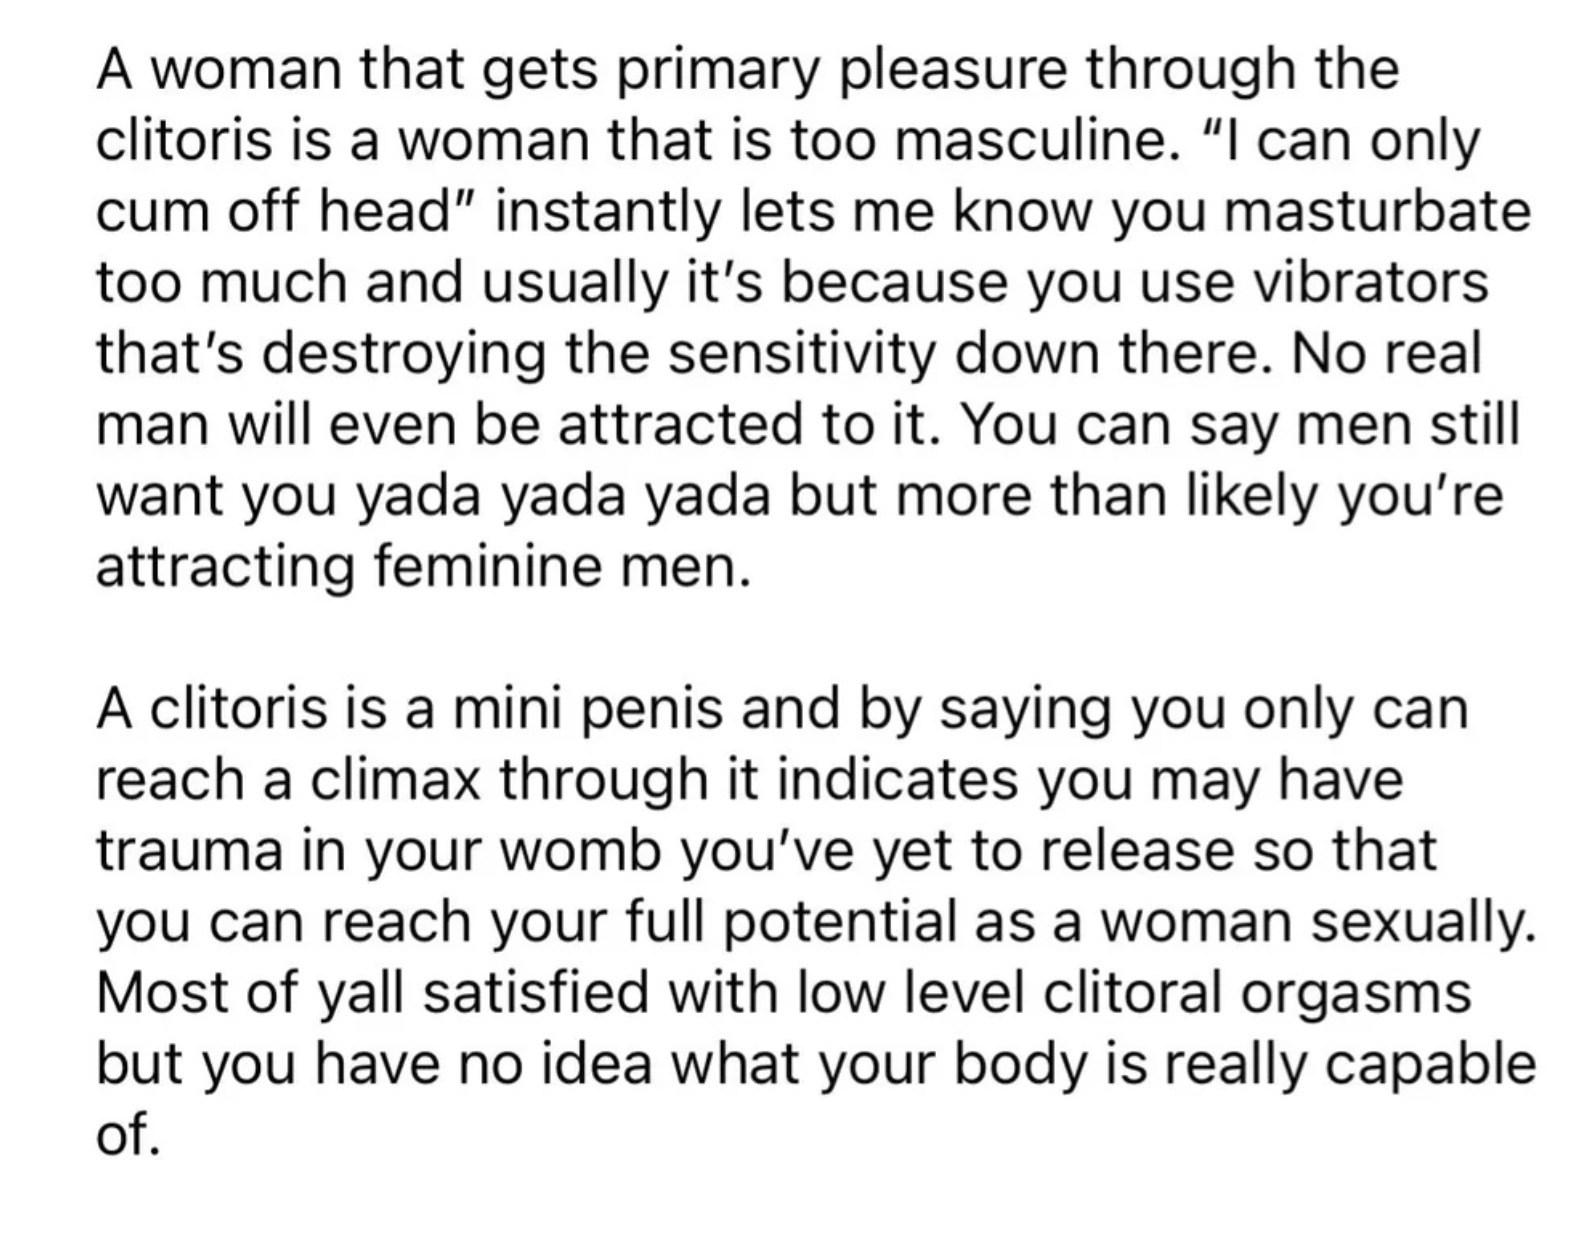 &quot;A woman that gets primary pleasure through the clitoris is too masculine&quot; and masturbates too much: &quot;A clitoris is a mini penis and by saying you only can reach a climax through it indicates you may have trauma in your womb&quot;